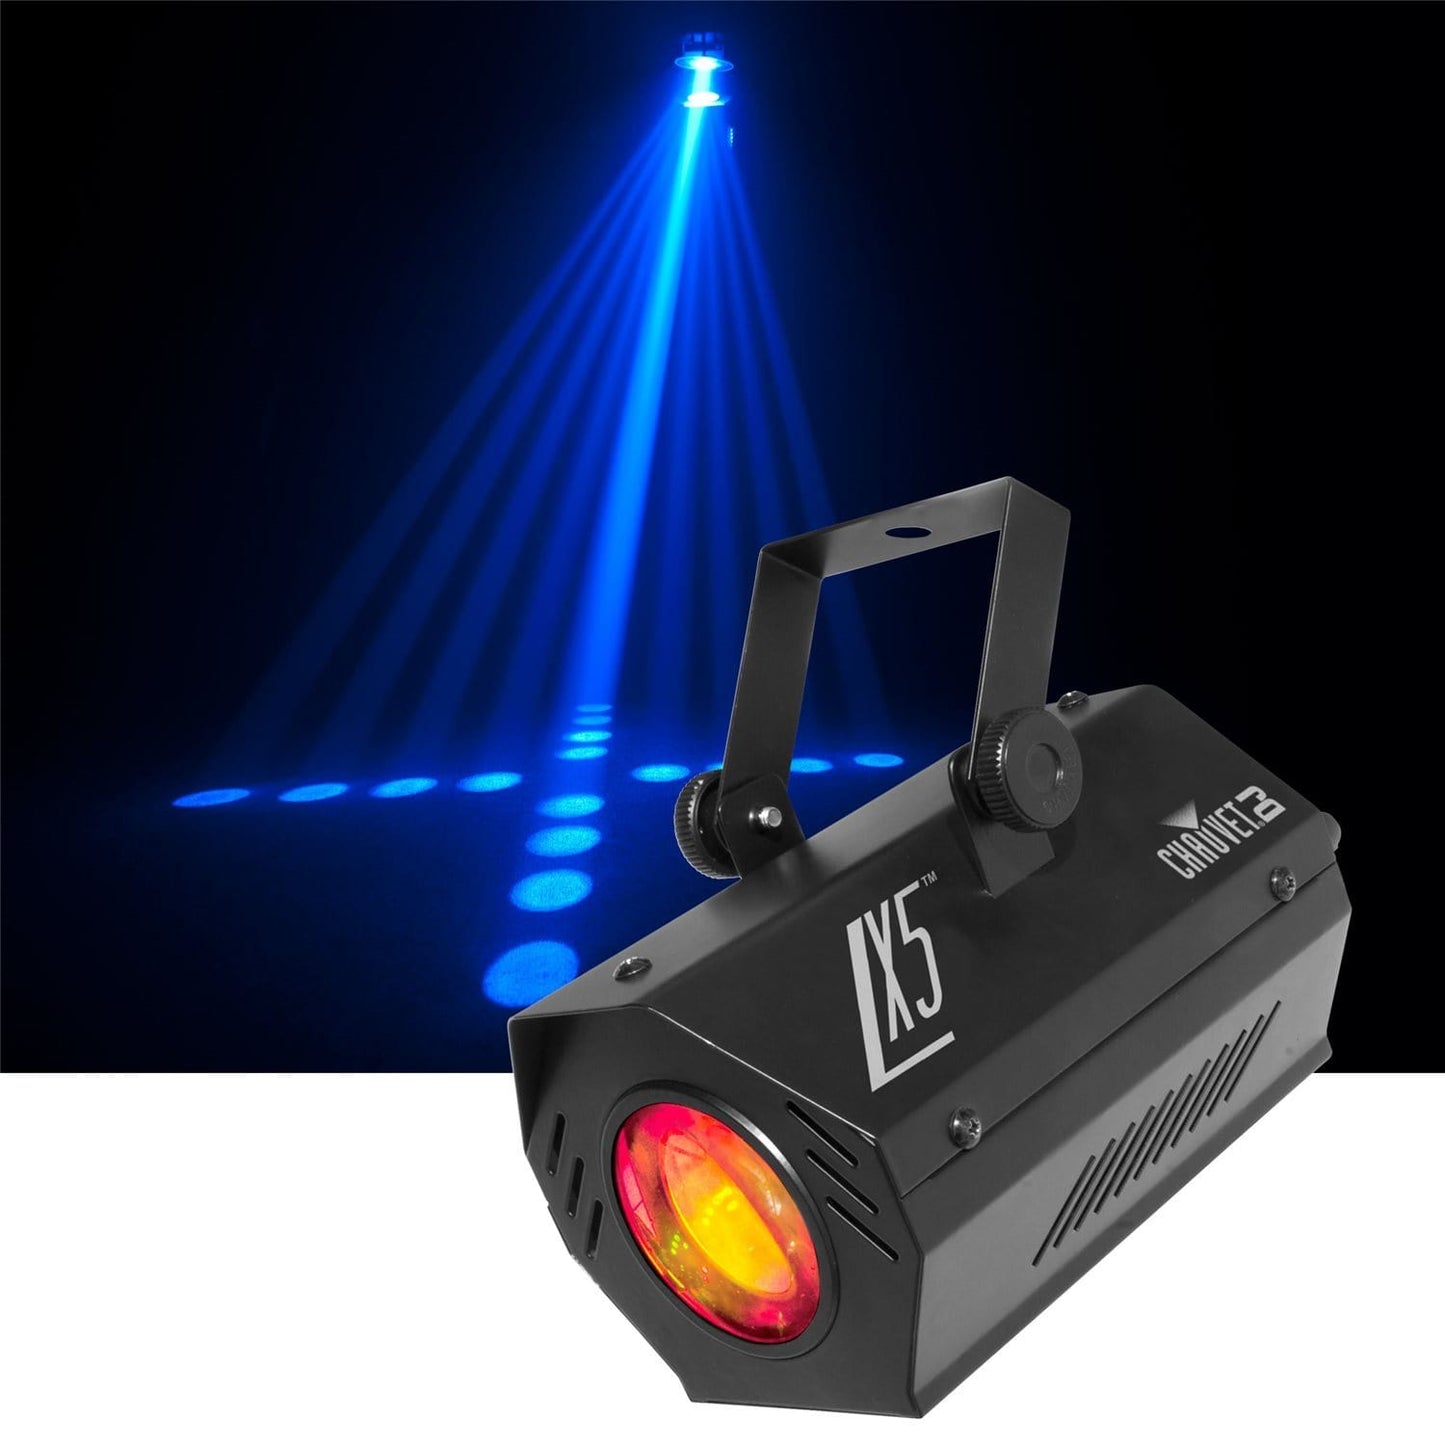 Chauvet LX-5 LED Moonflower Effect Light - PSSL ProSound and Stage Lighting